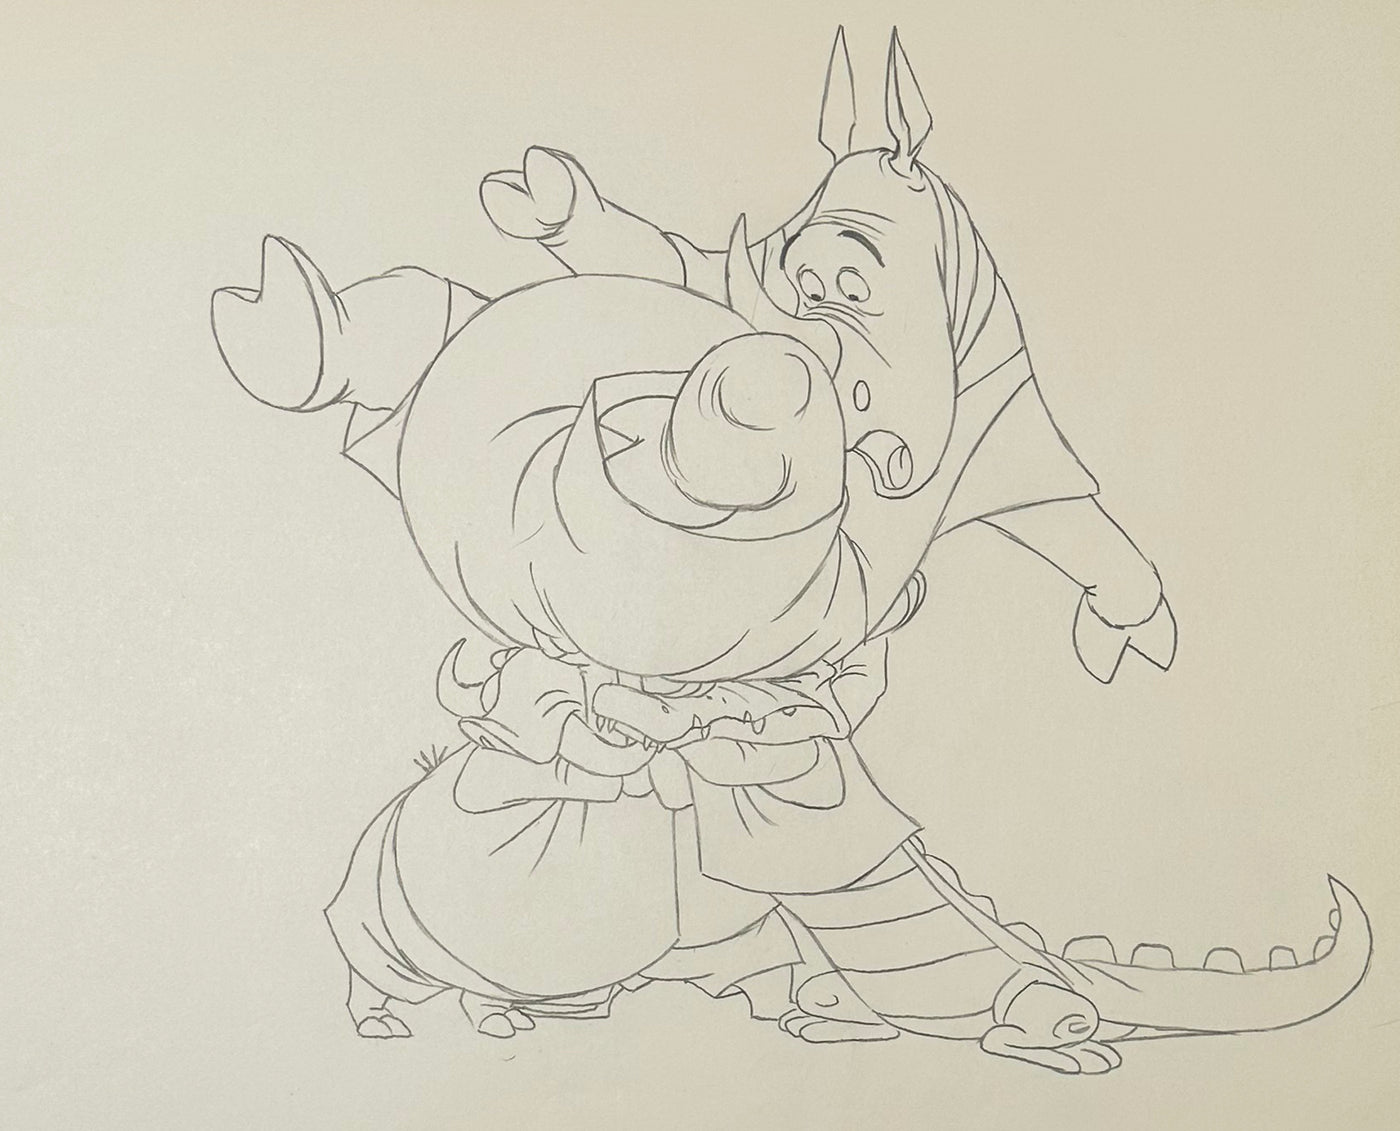 Original Walt Disney Production Drawing from Bedknobs and Broomsticks